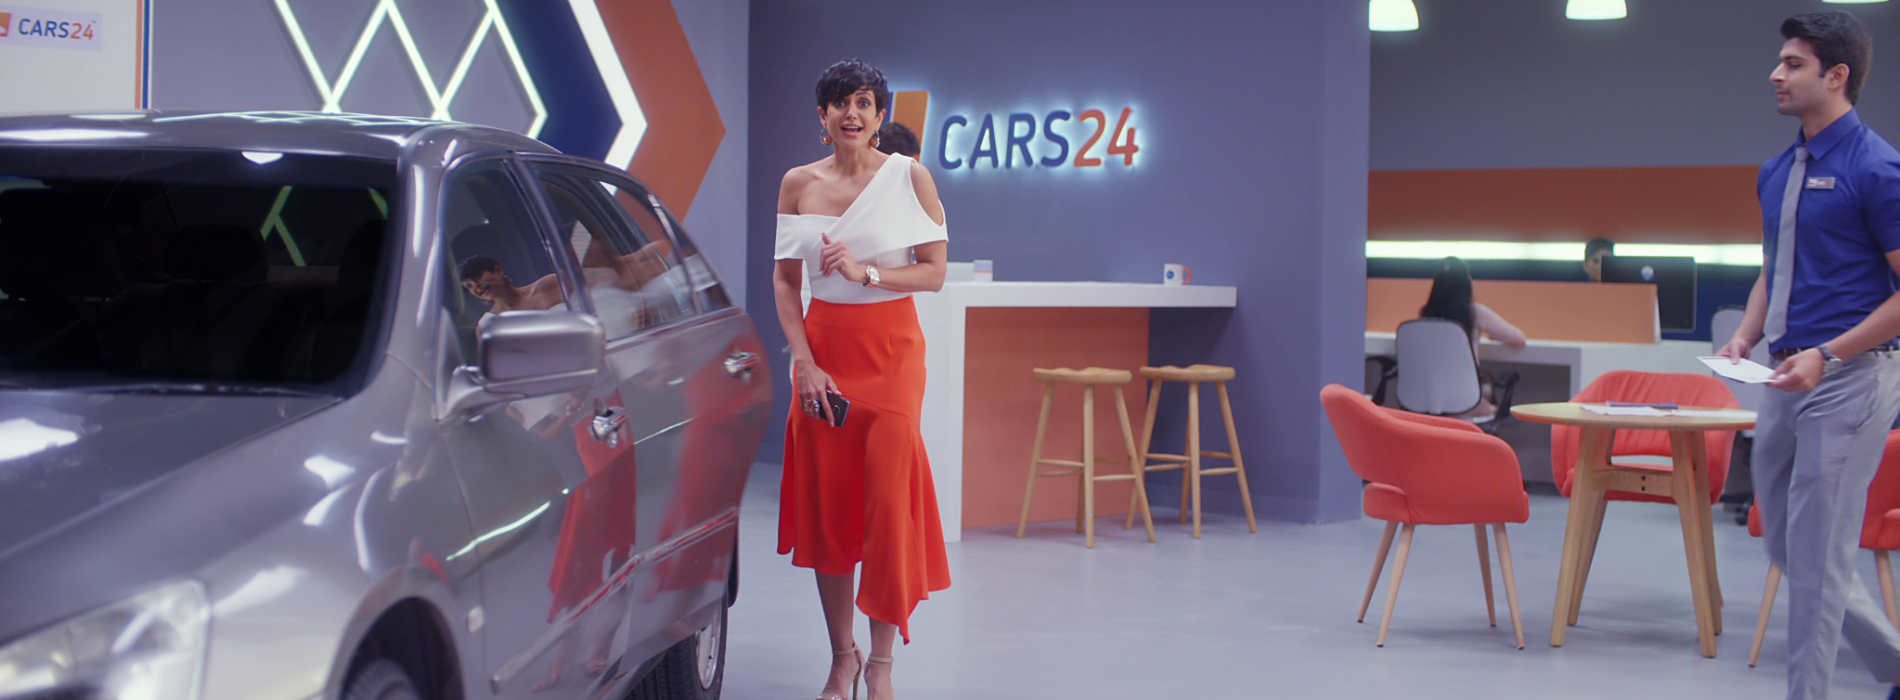 Cars24 announces fully integrated brand re-launch and re-positioning